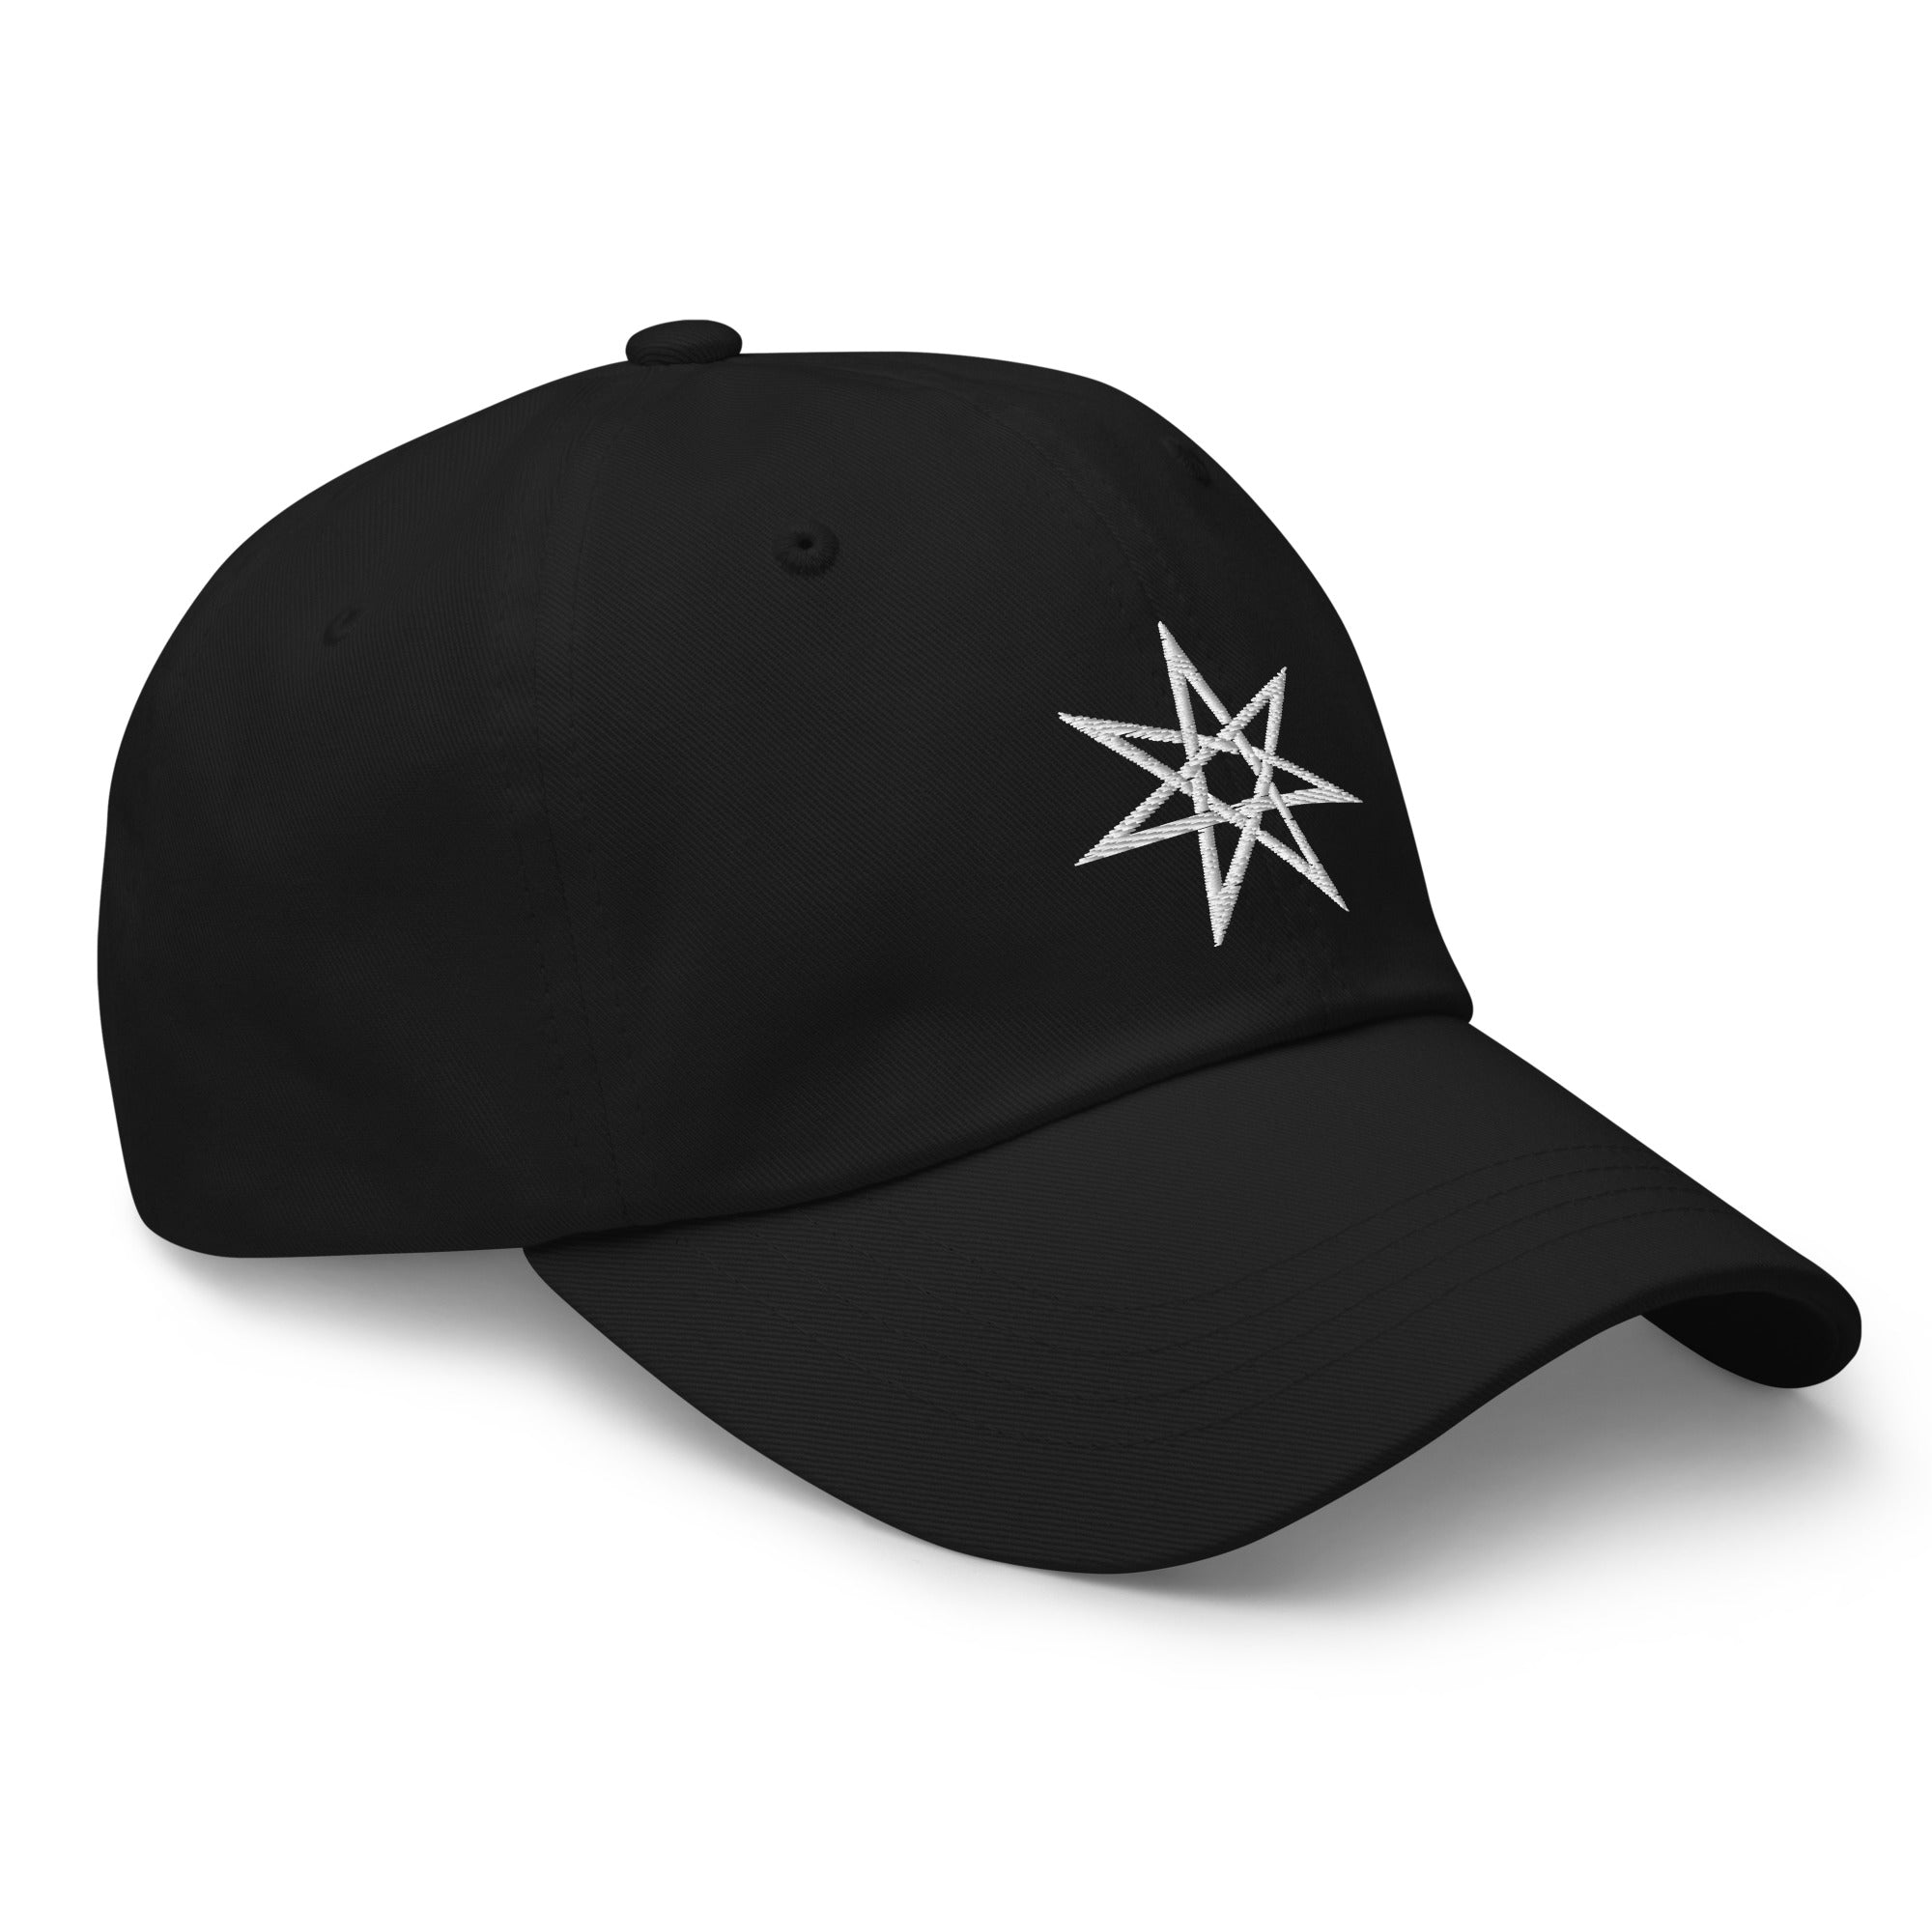 Elven Star Embroidered Baseball Cap Pagan Witchcraft Symbol Dad hat - Edge of Life Designs